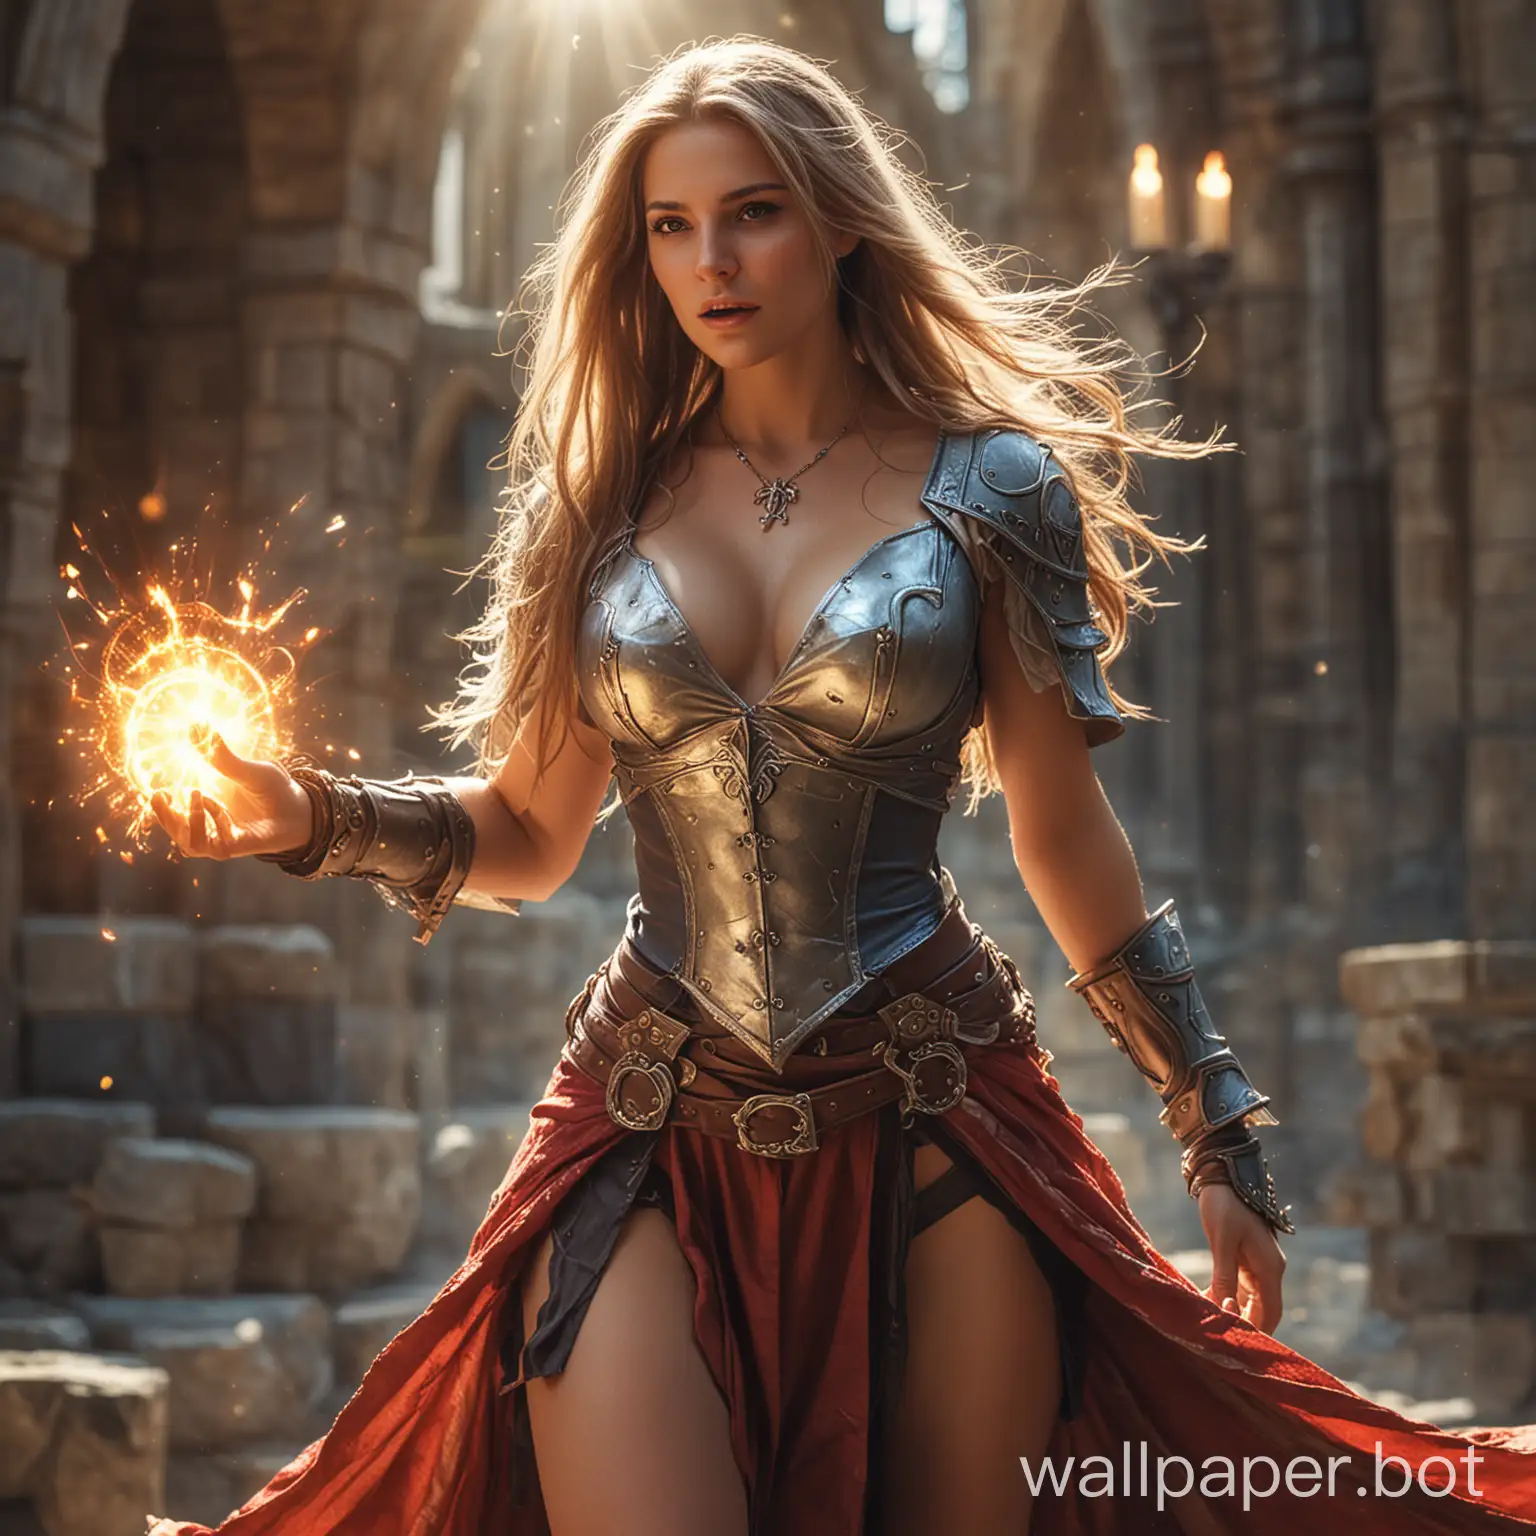 Powerful-Female-Battlemage-Casting-Magical-Spells-with-Intense-Lighting-Effects